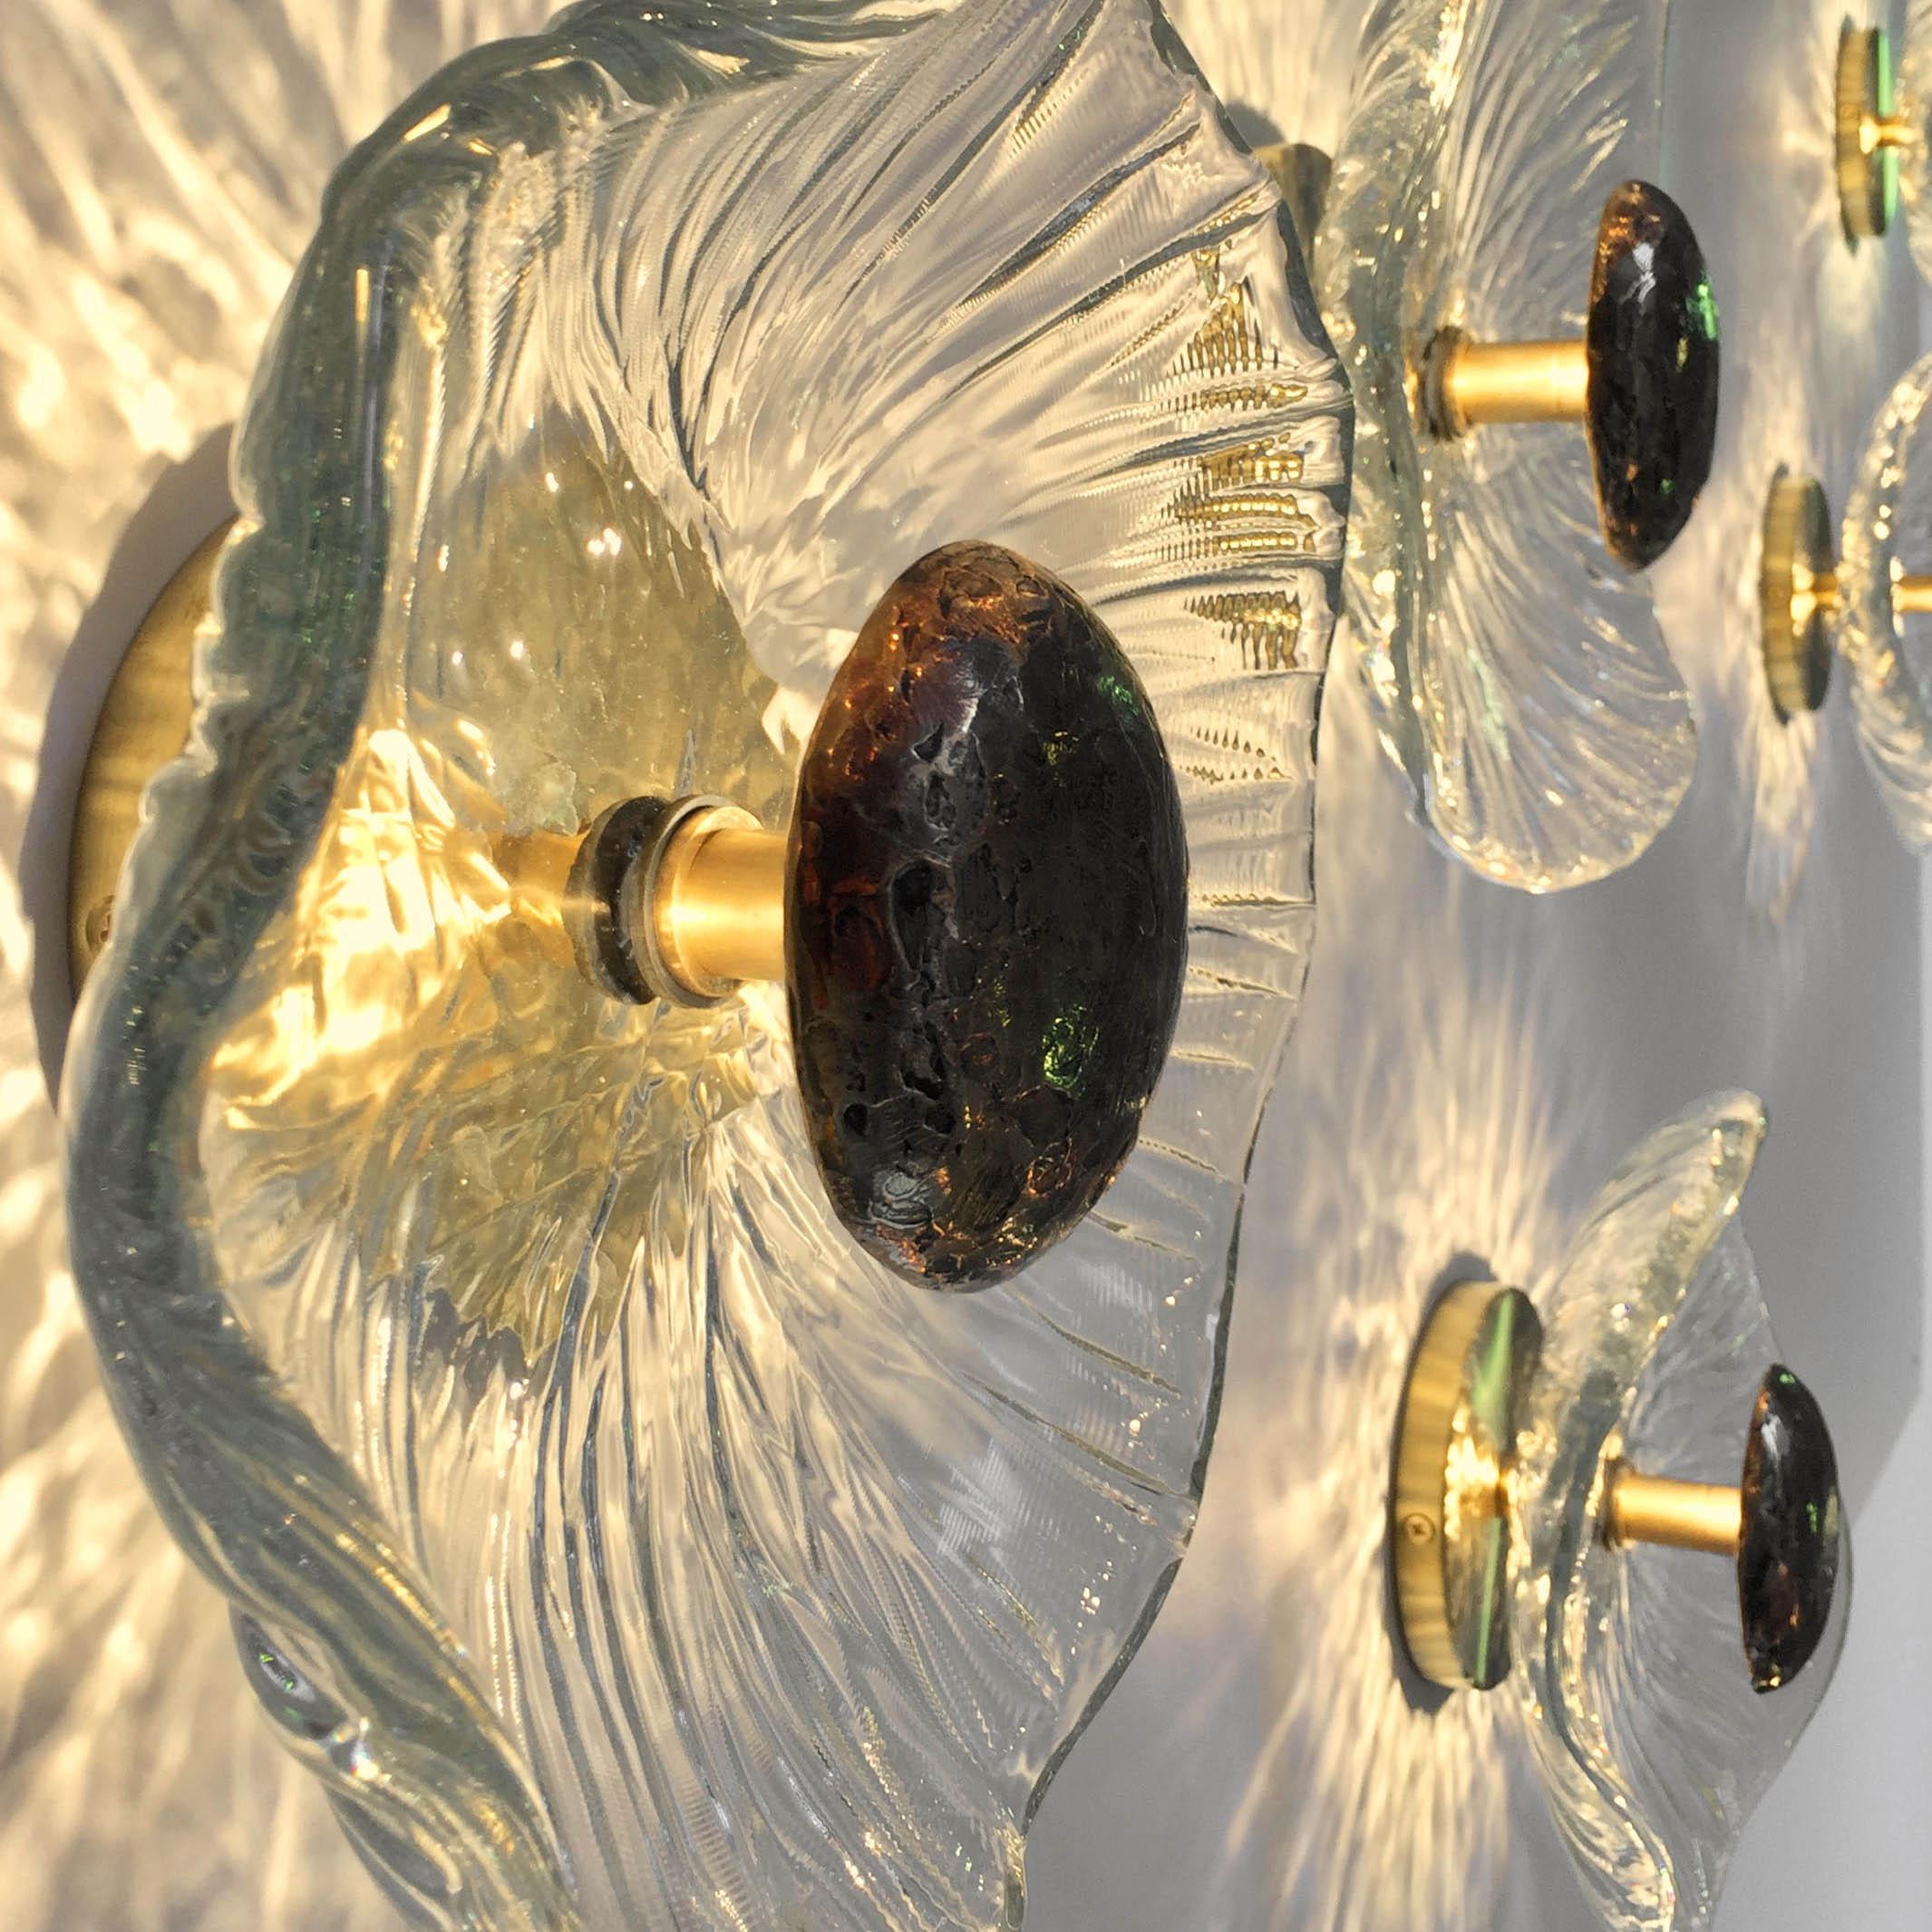 The Iris uses mottled clear thick glass and a cast bronze heat sink to create a fixture that is a combination of ancient crafts and forward thinking. Each glass piece is hand shaped so that the pattern is individual for every one. The molten crystal